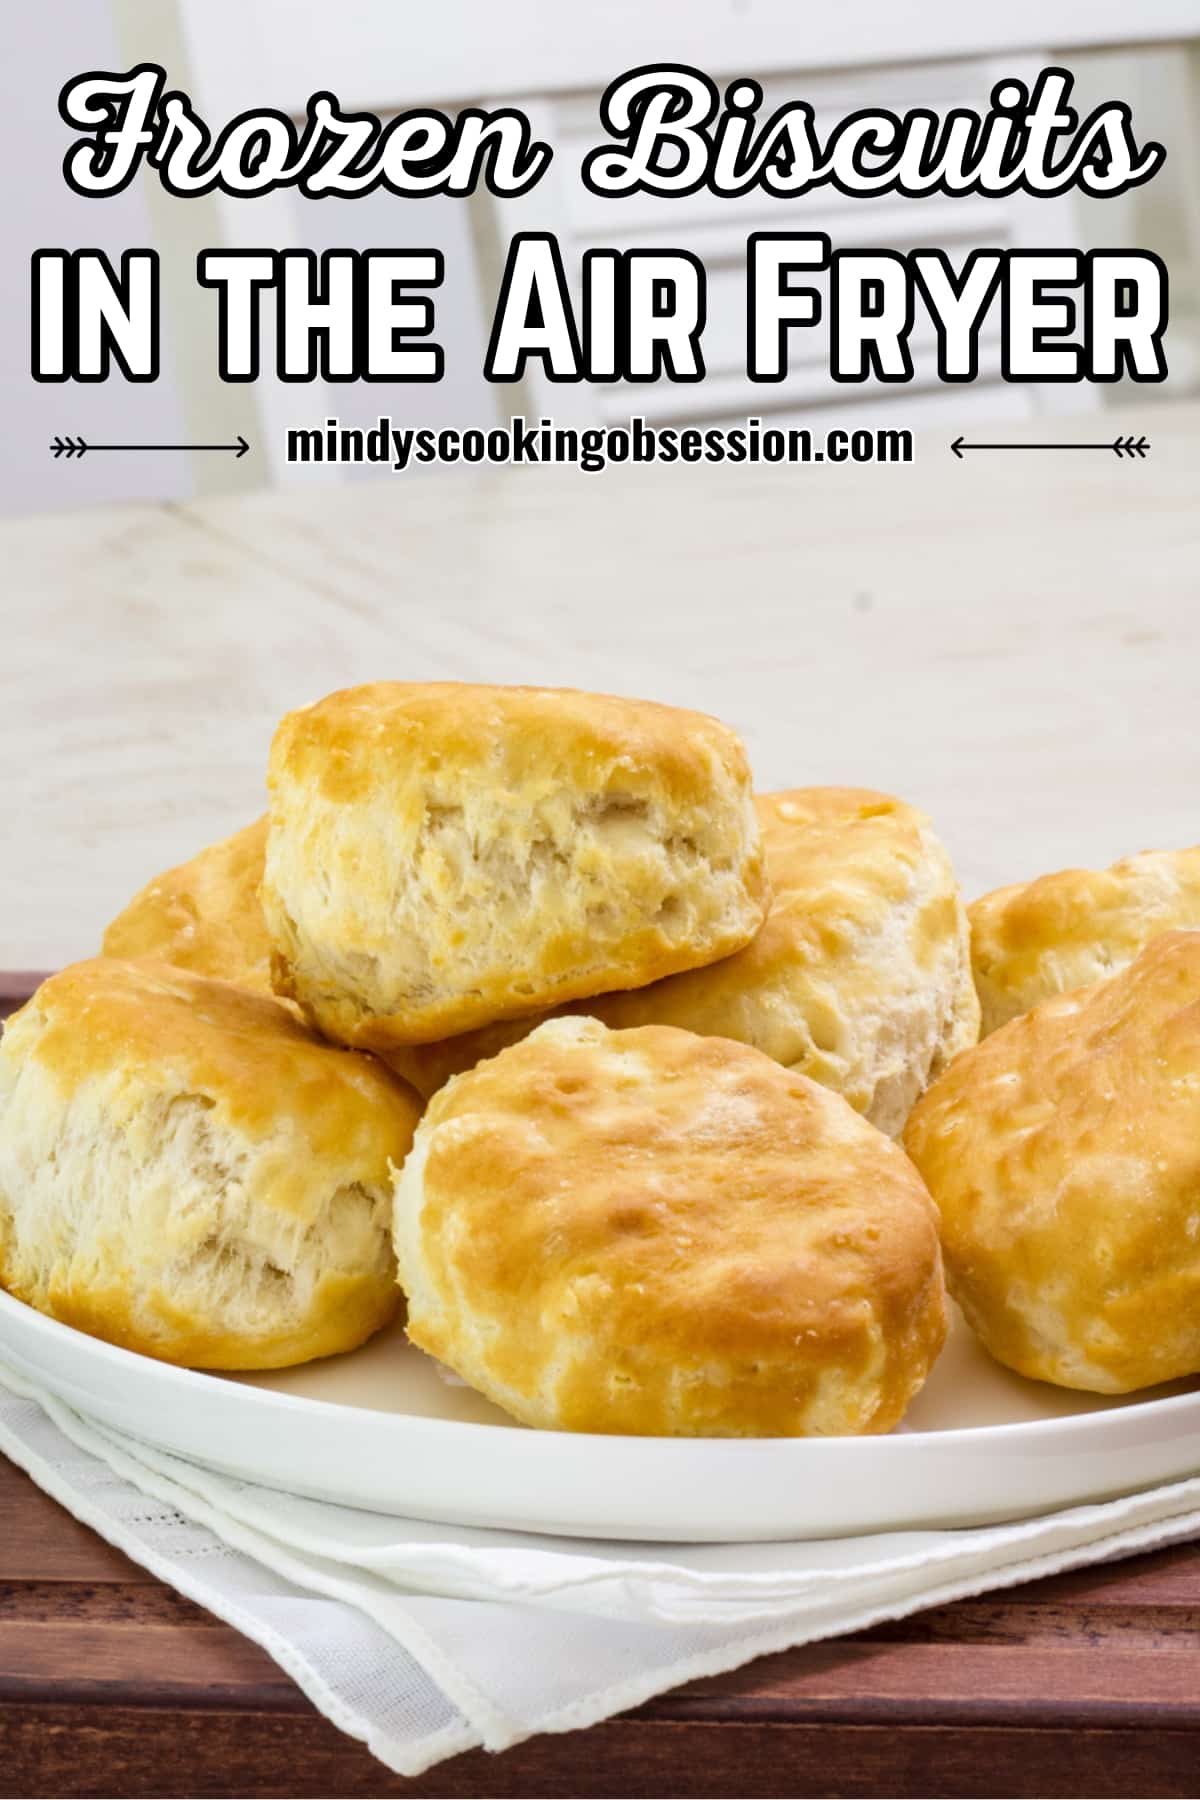 Can You Put Parchment Paper in an Air Fryer? How-to guide